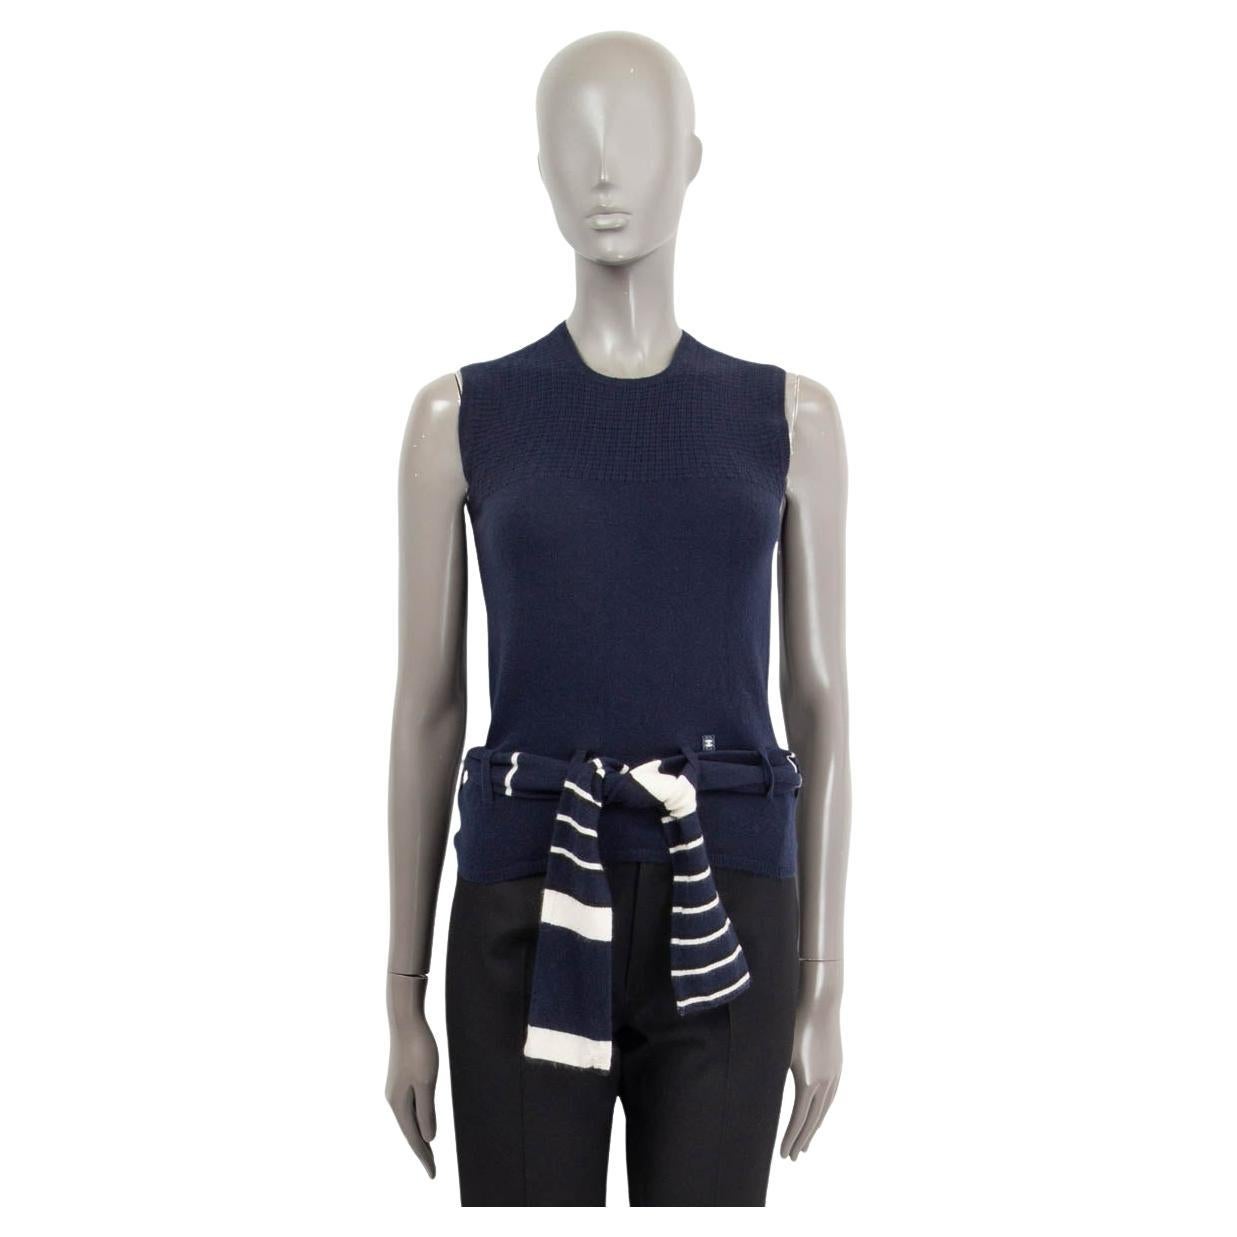 CHANEL navy blue cashmere 2002 SLEEVELESS BELTED KNIT TOP Shirt 38 S For Sale